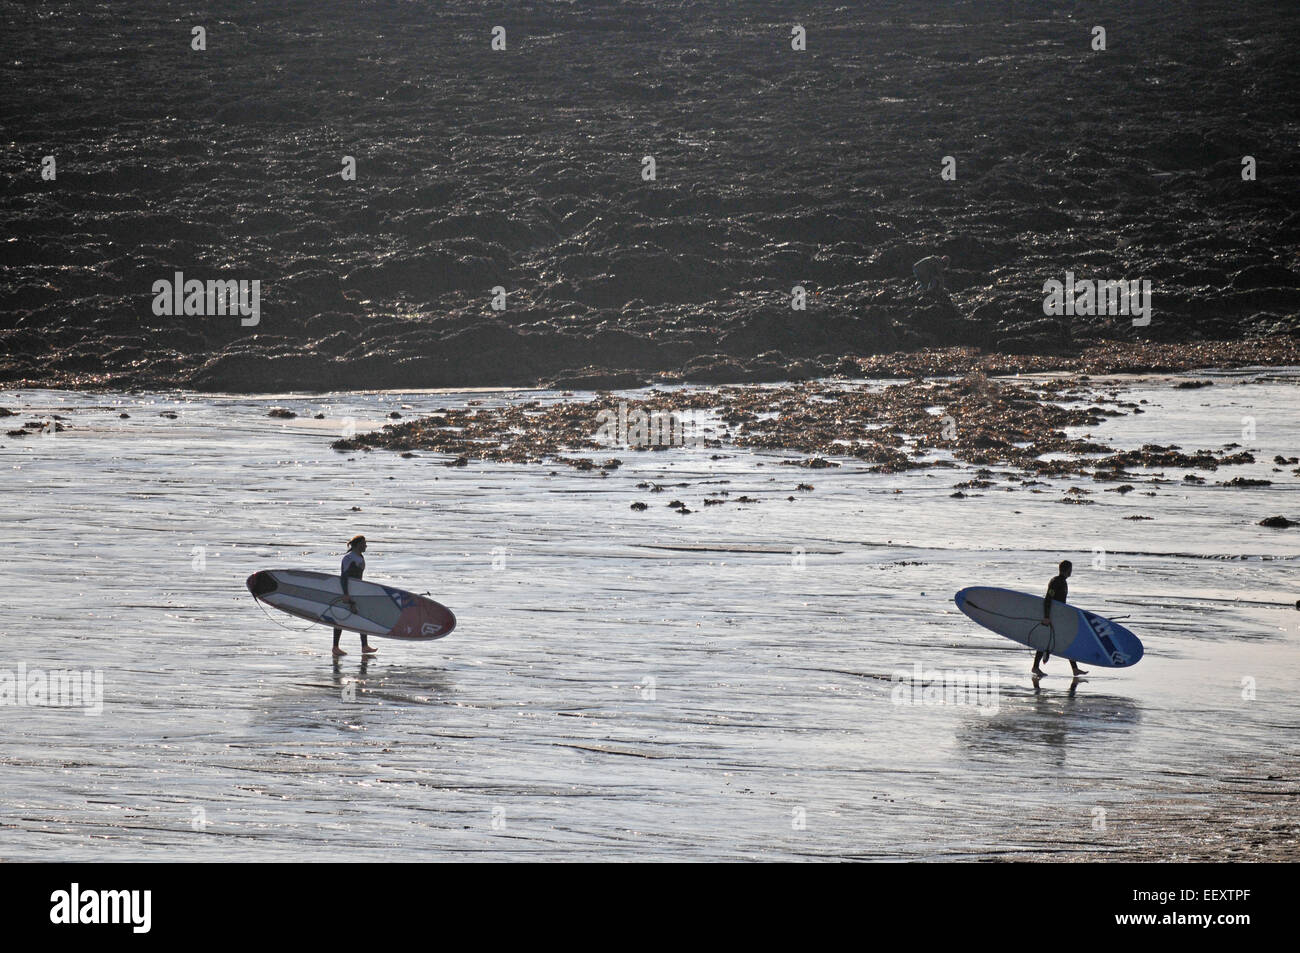 Two surfers in the early evening on Gyllyngvase Beach, Falmouth, UK Stock Photo